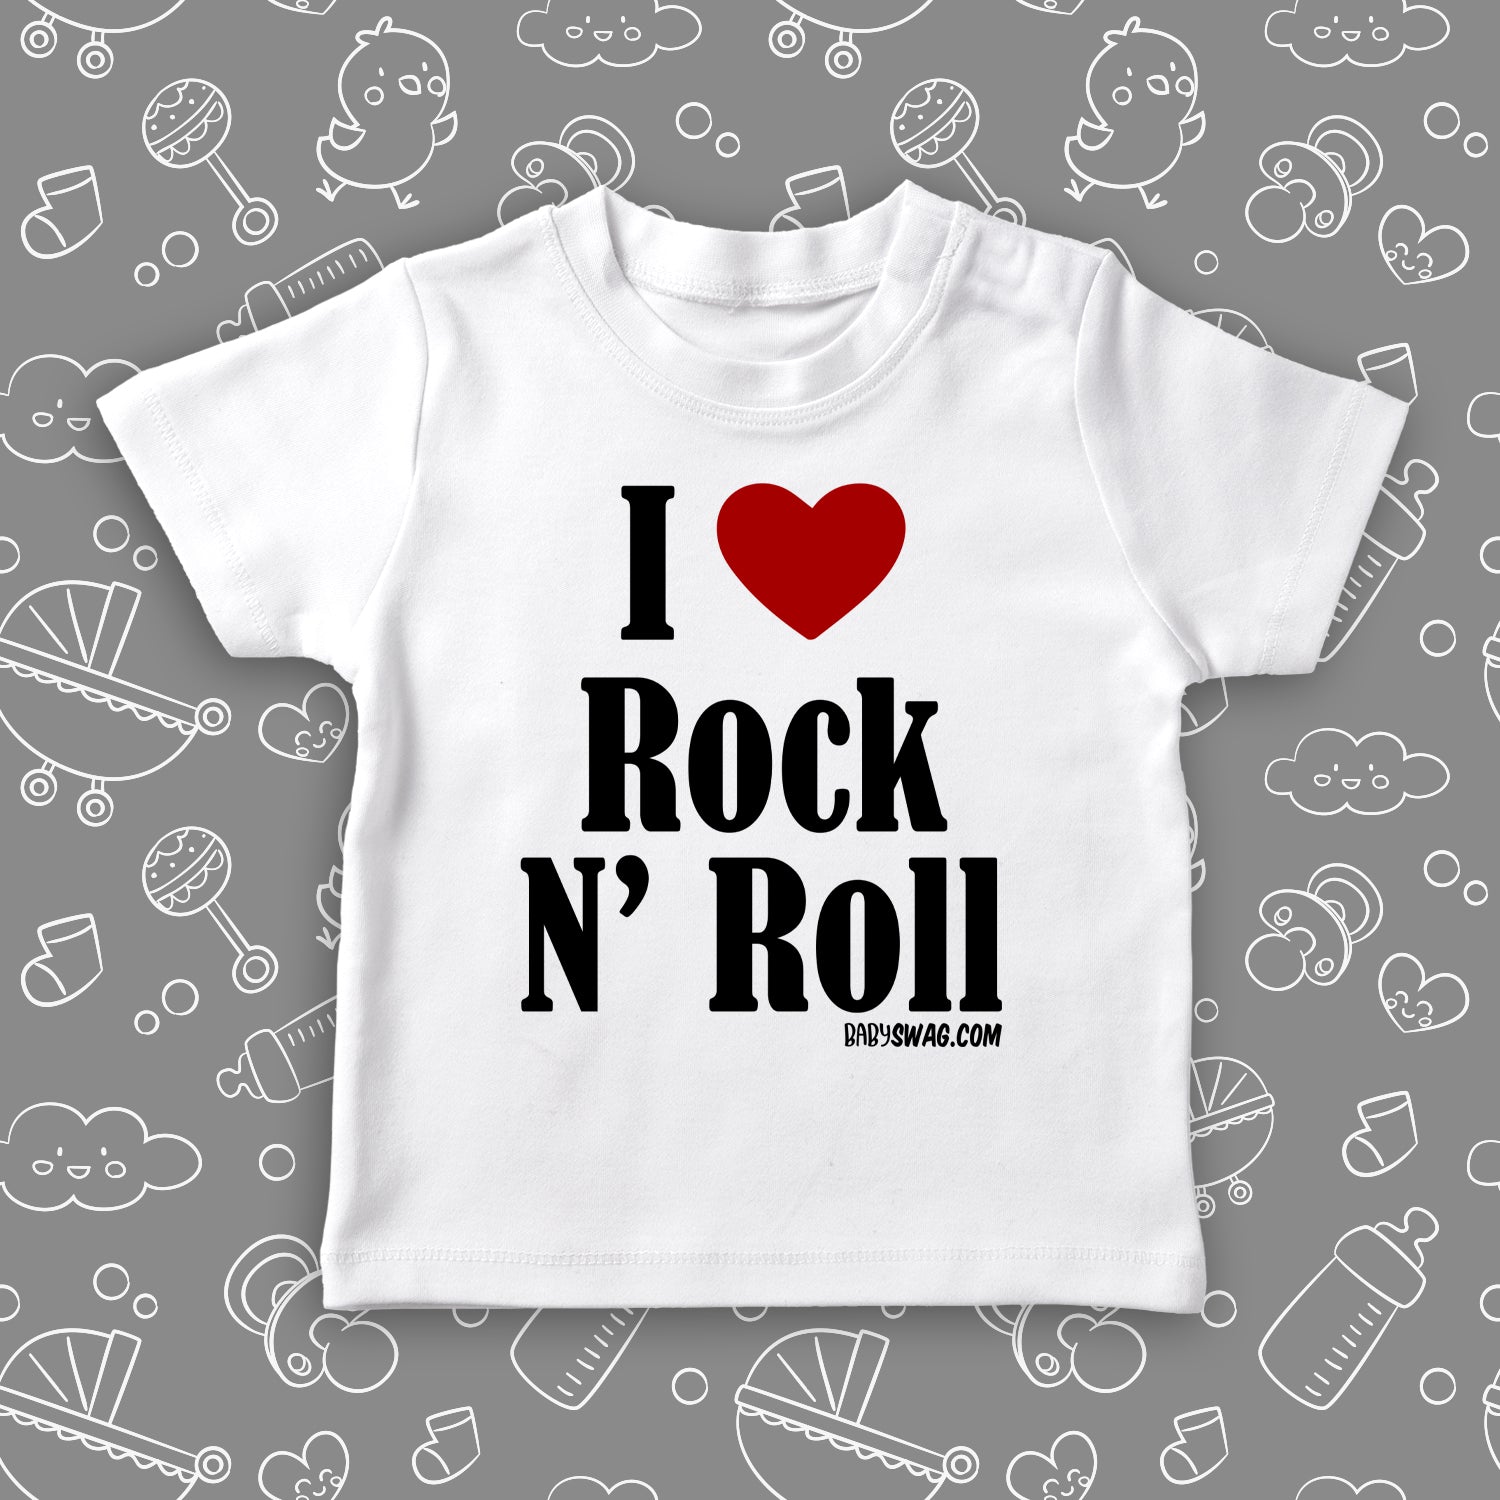 Rock Love Roll And Swag | I (T) Baby